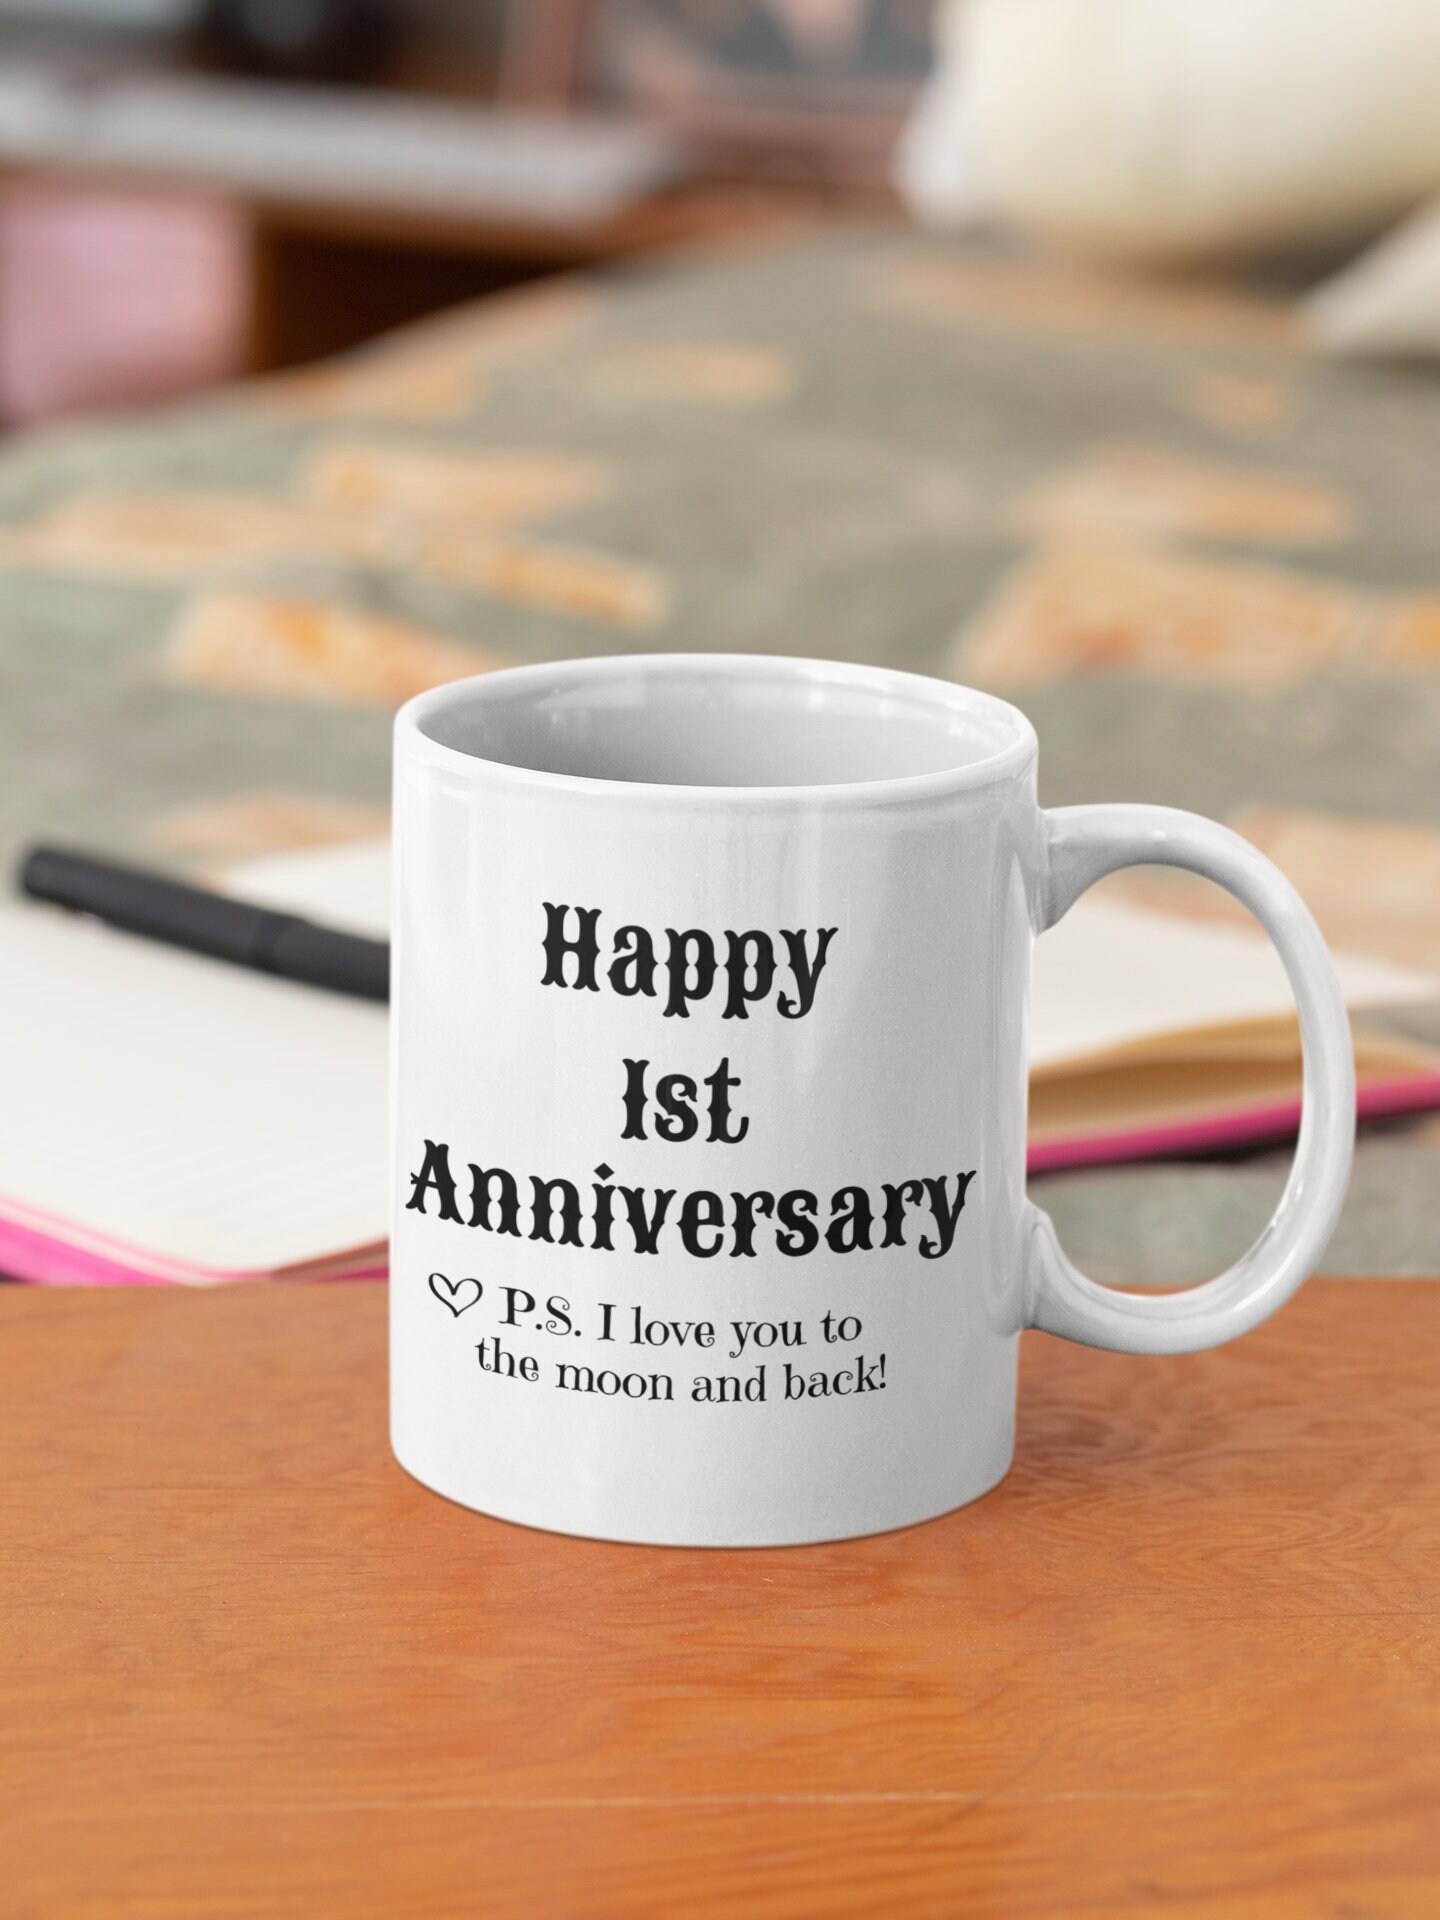 FITWICK 1 Year Anniversary Mug Gifts for Boyfriends Girlfriends with Card, One Year Dating Anniversary Mug Gift for Her Him, 1st Girlfriend